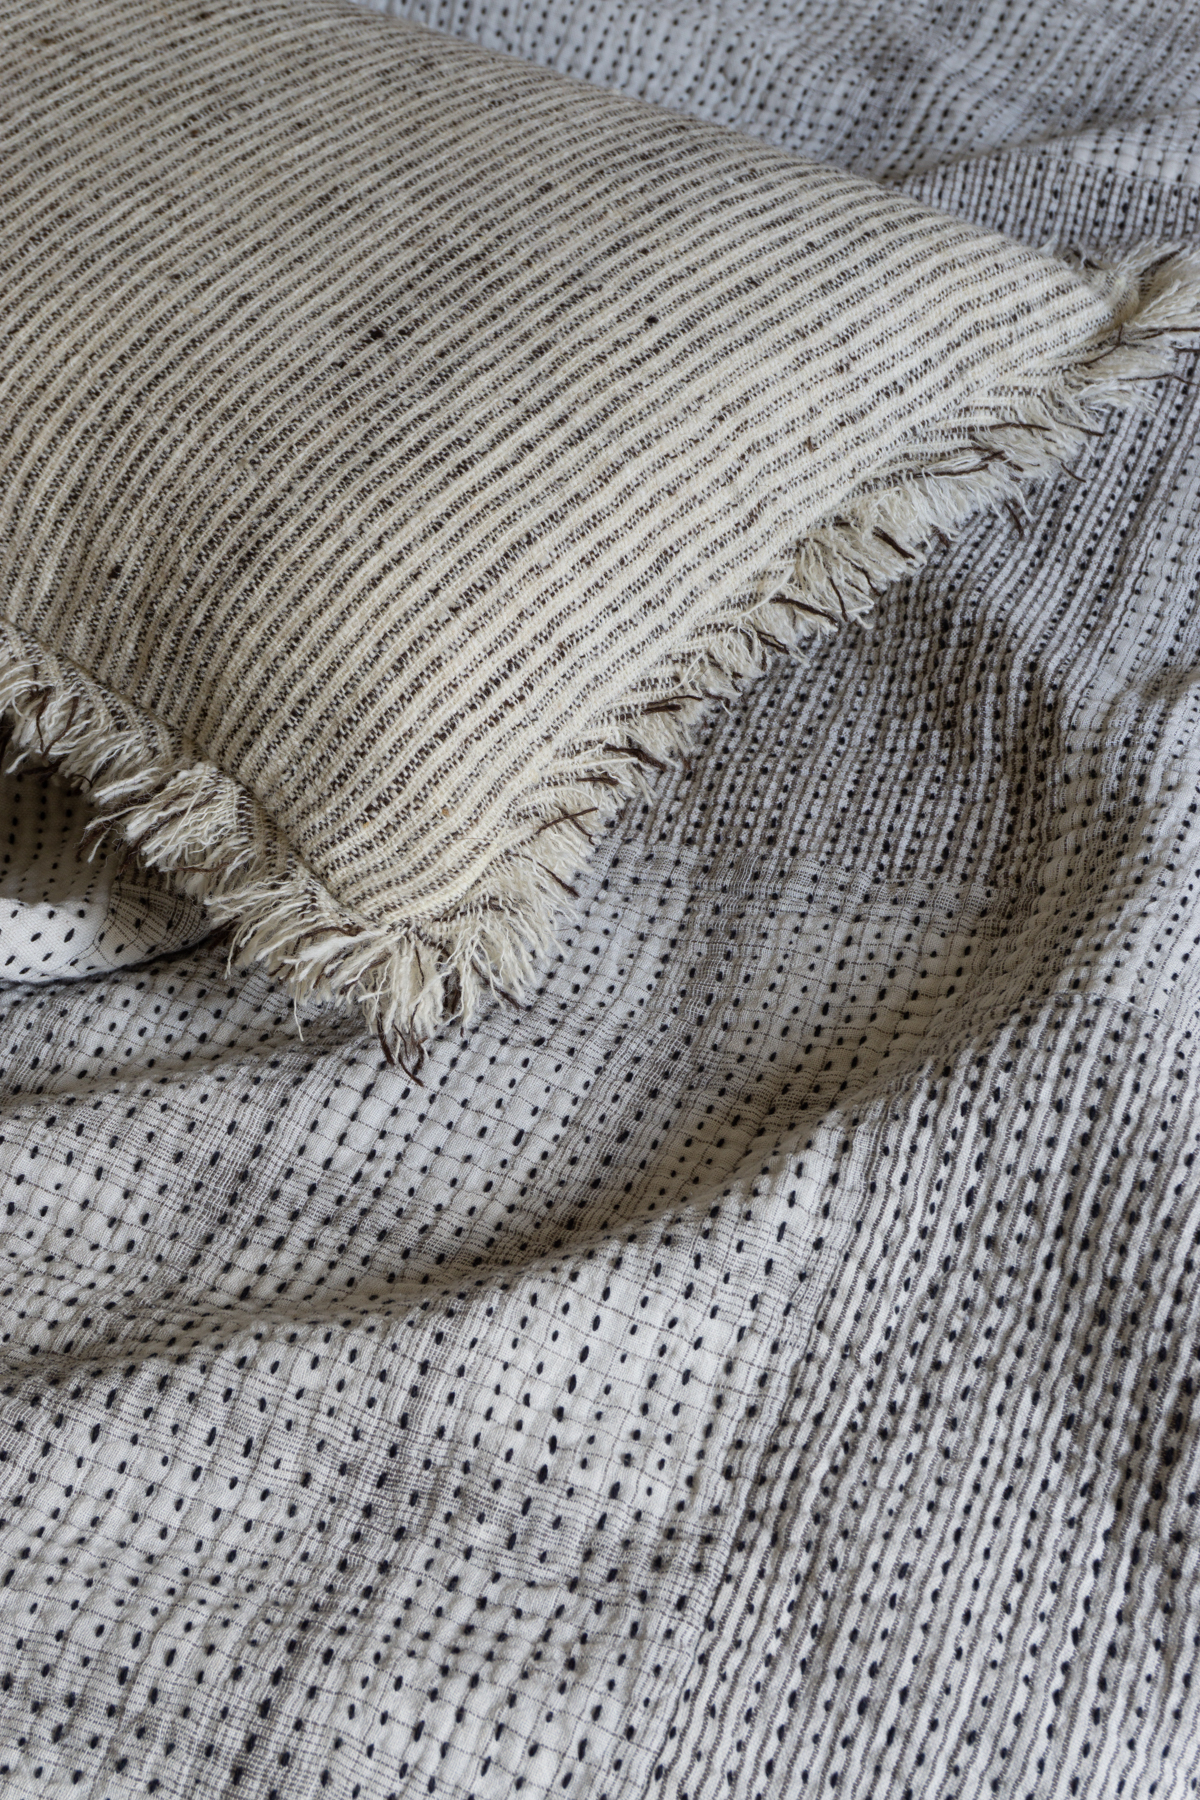 Sustainable Ethical and Scandinavian Bedding from Stitch by Stitch, Minimalist Natural Bedroom Interior Inspo / RG Daily Blog